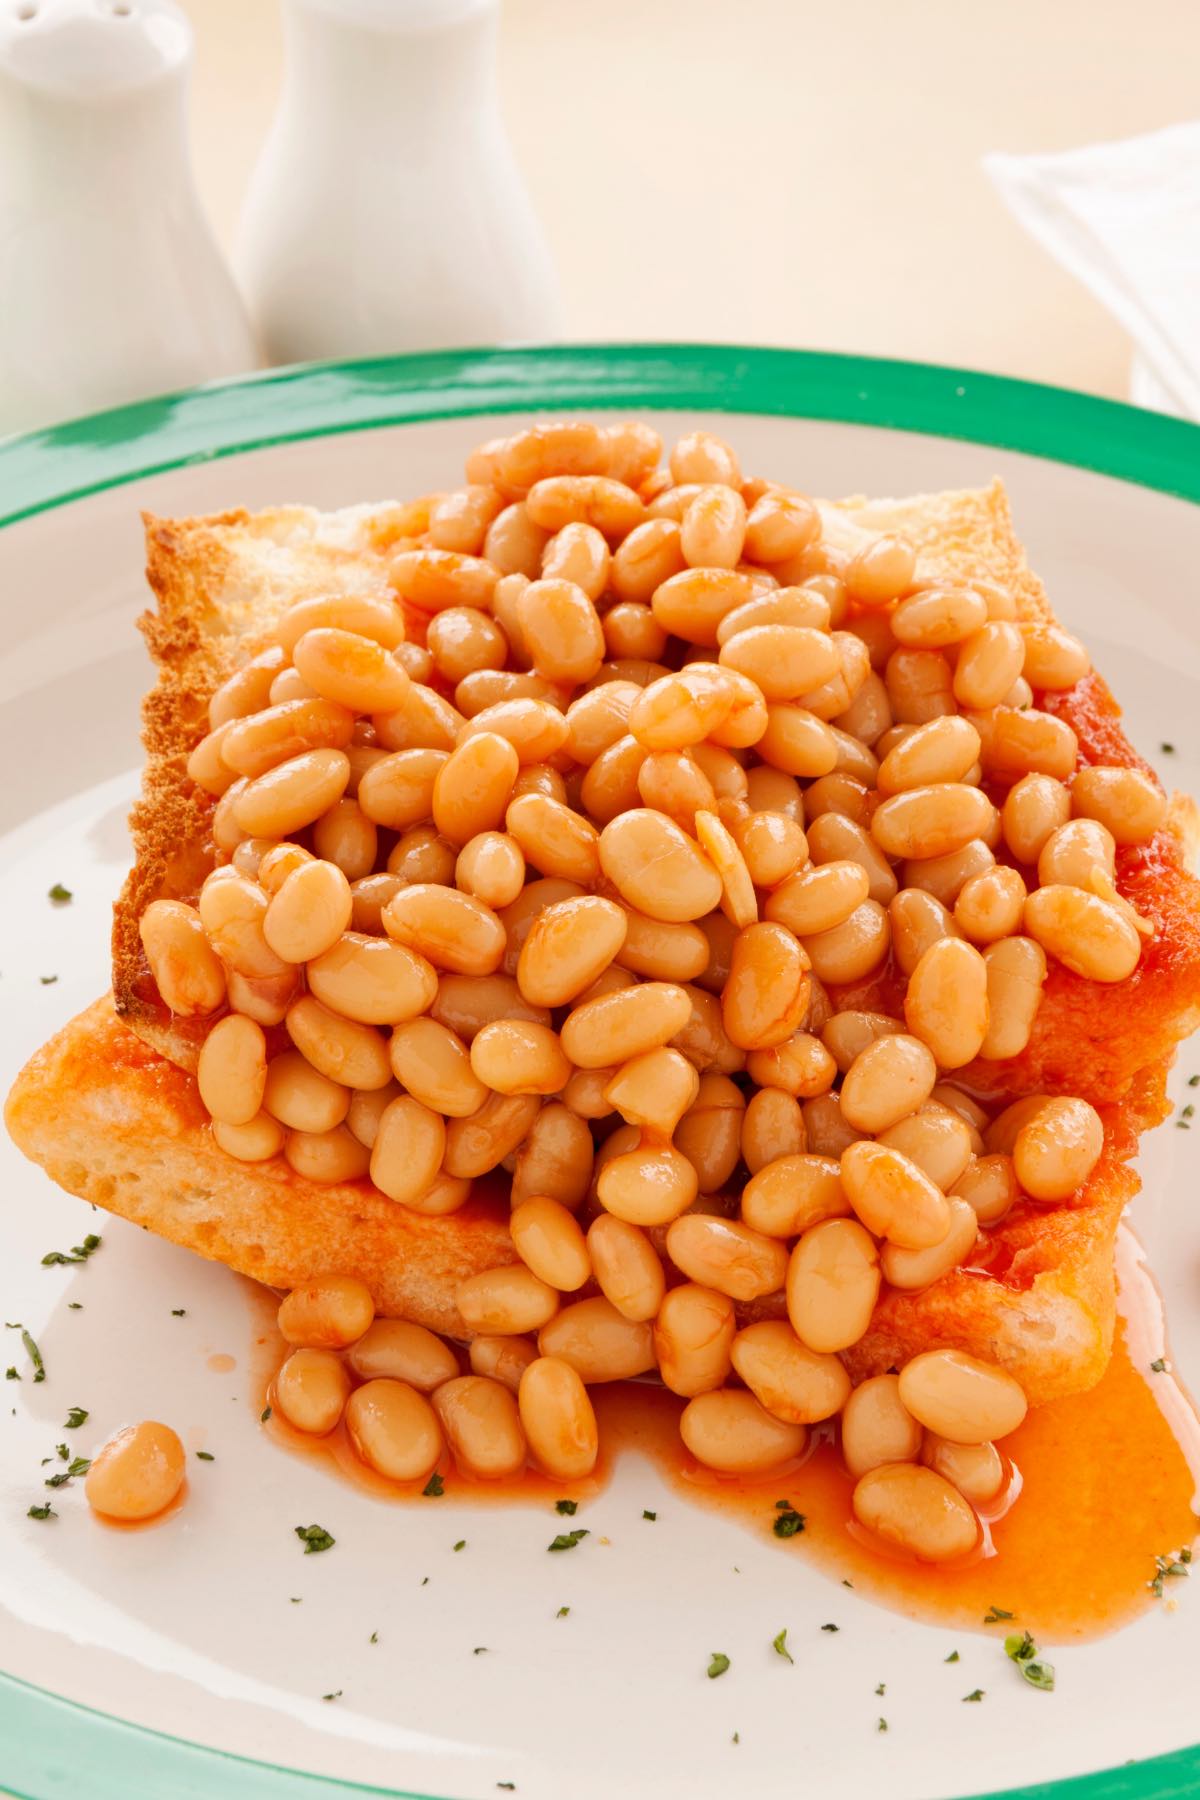 A fancy presentation of beans and toast